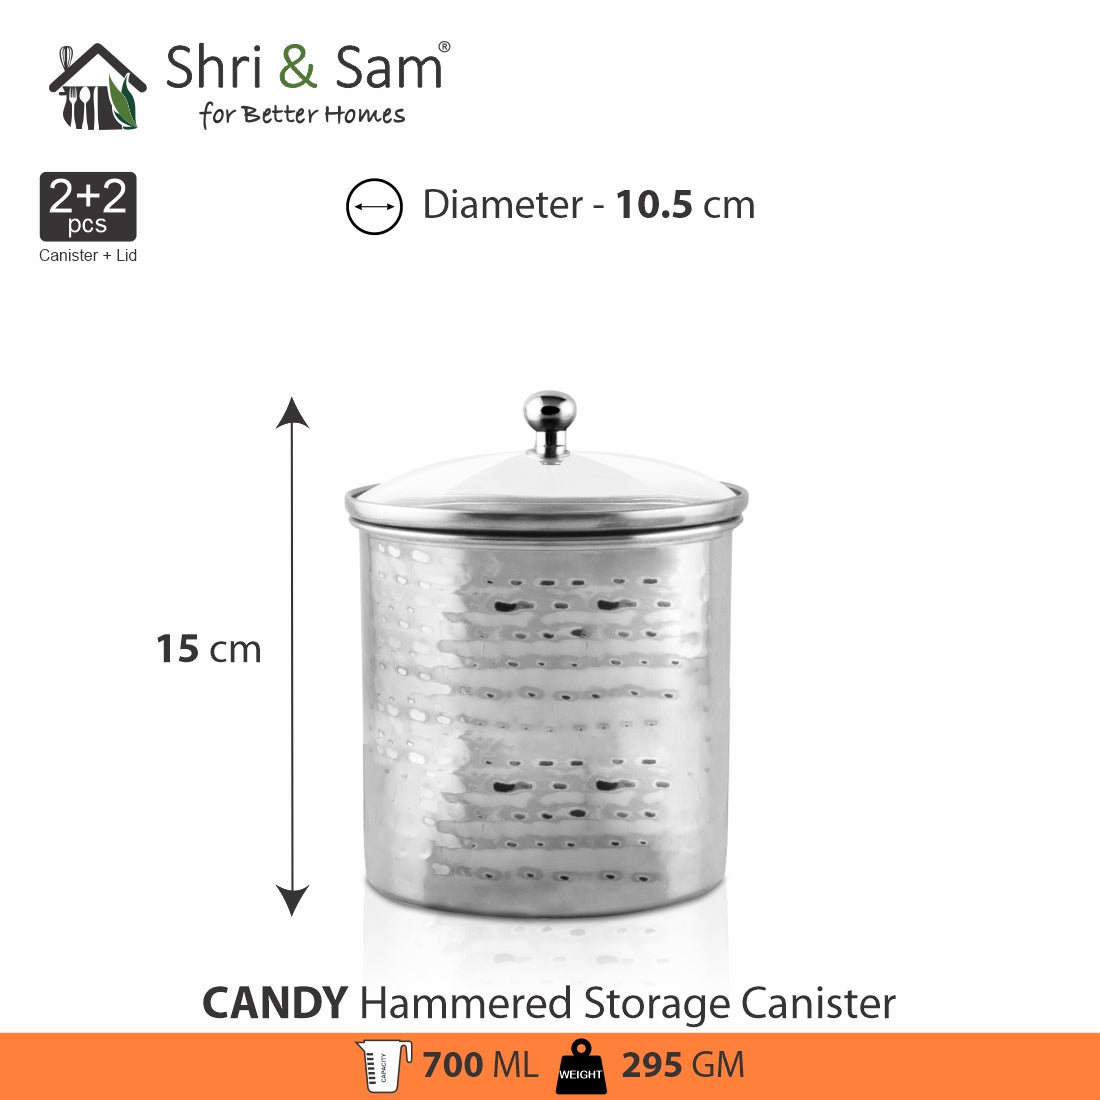 Jagdamba Cutlery Pvt Ltd. Serveware 2 PCS - 1000 ML Candy Hammered Storage Canister with air tight glass lid